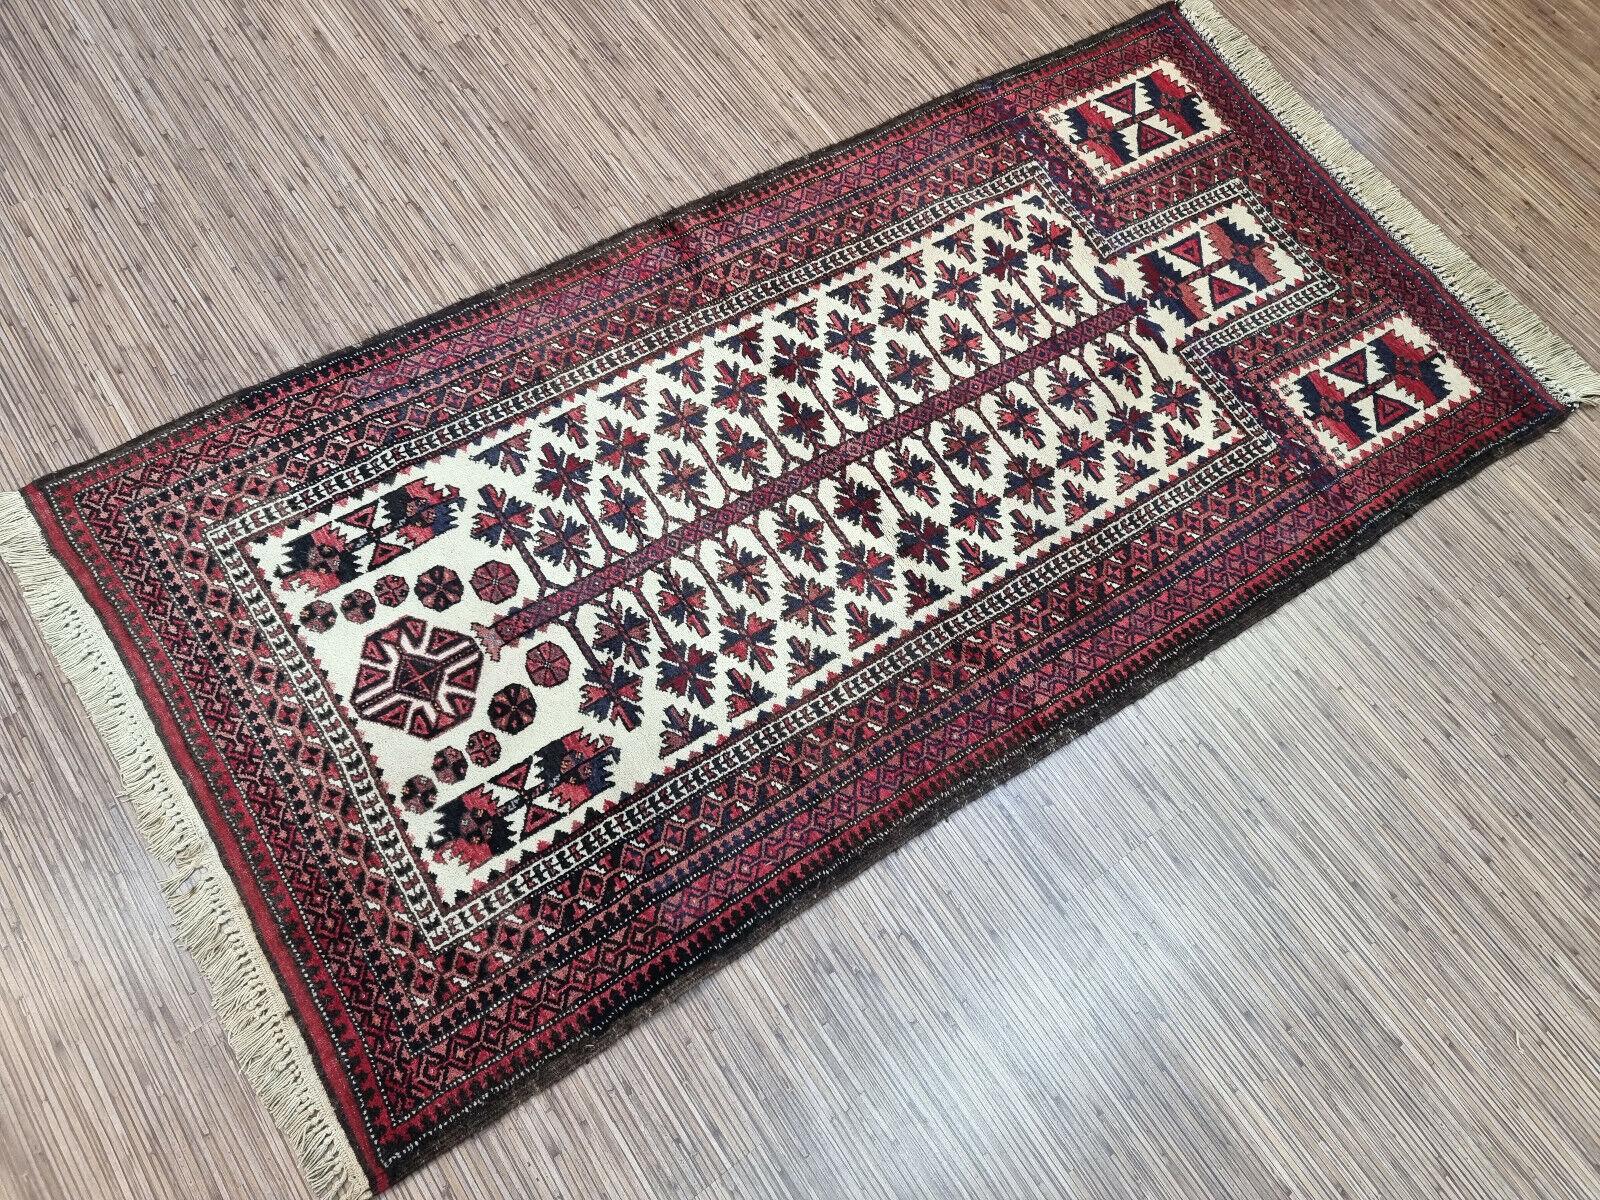 Handmade Vintage Afghan Baluch Prayer Rug 2.7' x 5.5', 1950s - 1D90 In Good Condition For Sale In Bordeaux, FR